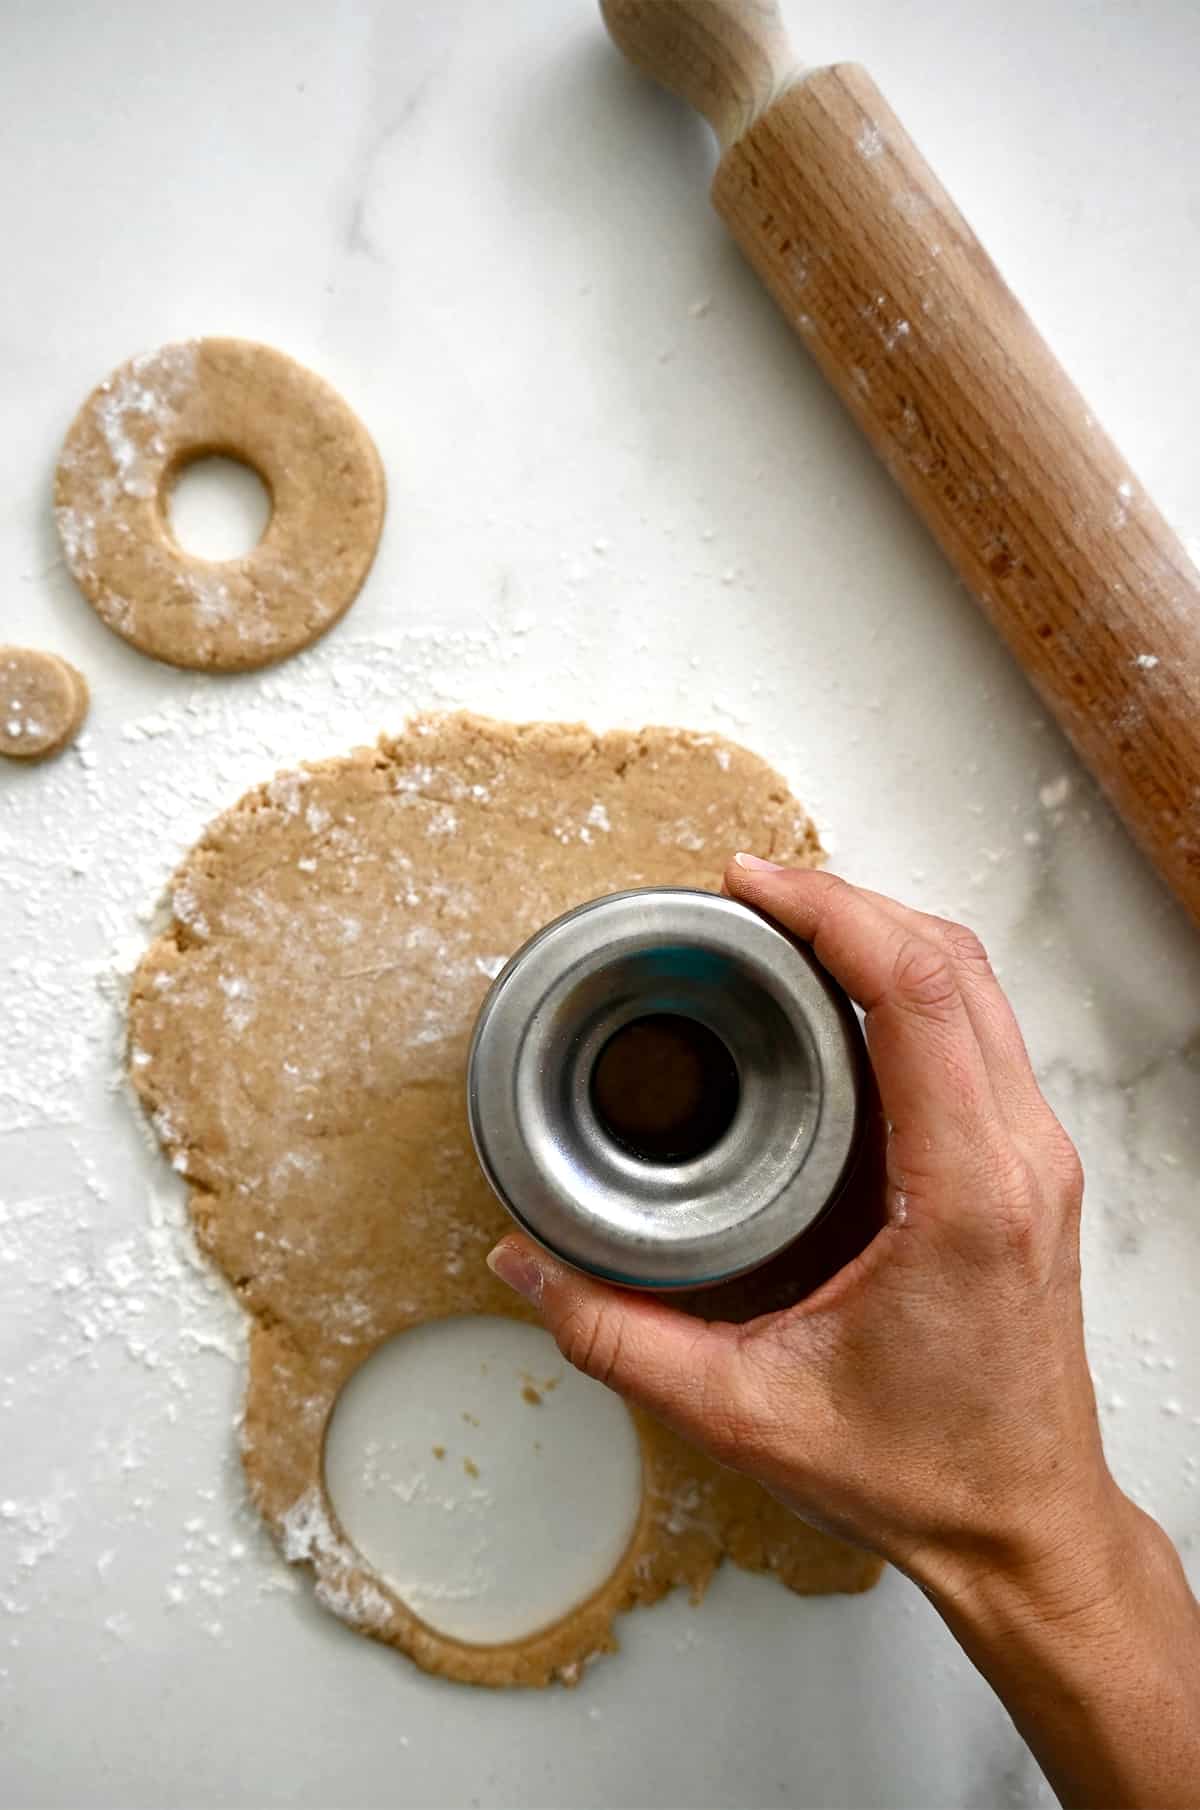 A hand holds a round cookie cutter atop doughnut dough to cut out pieces of dough to fry.